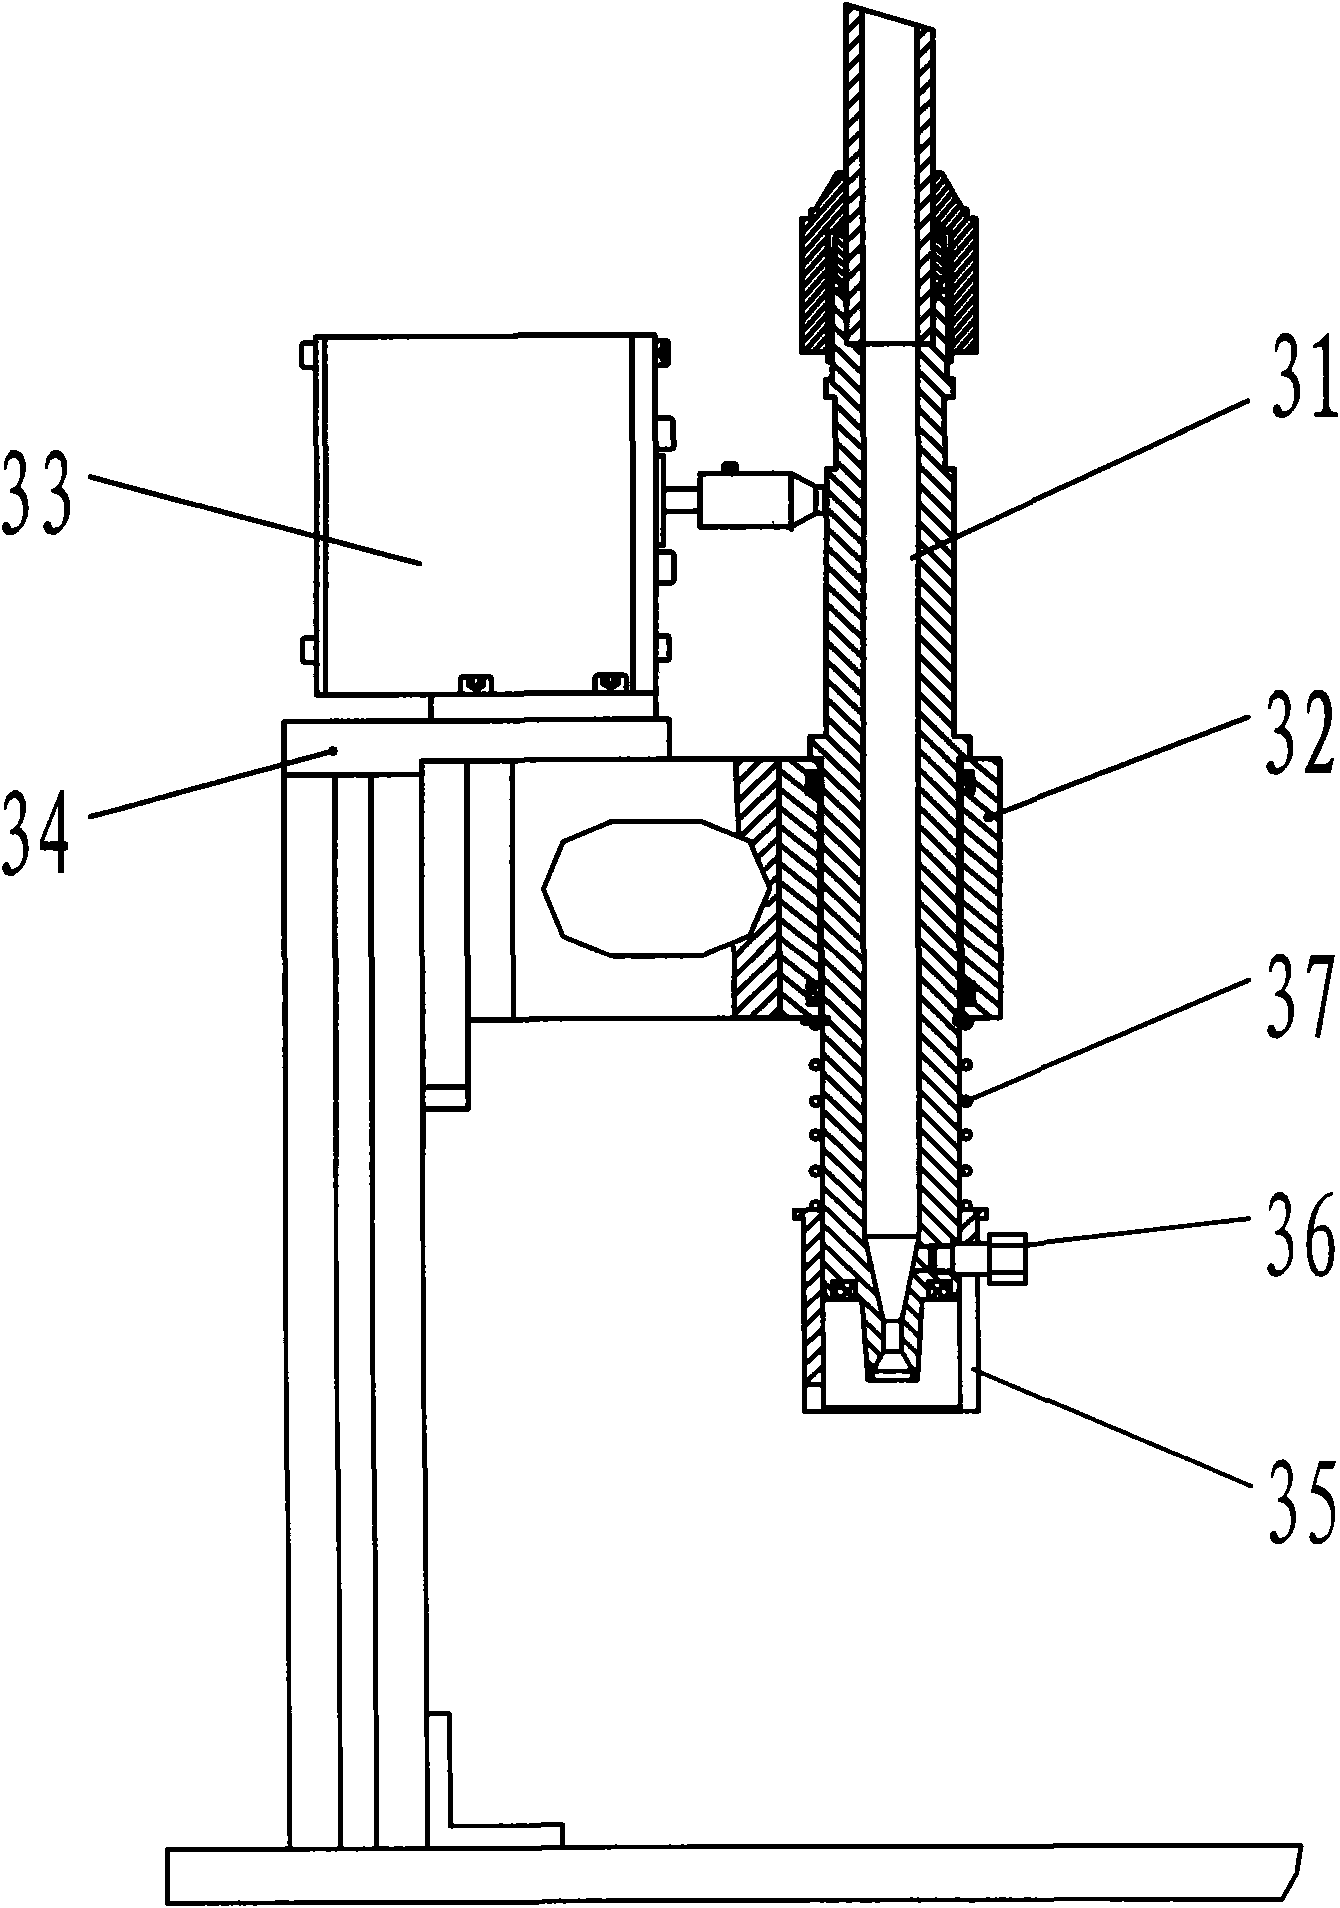 Measurement device for residual carbon quantity in fly ash